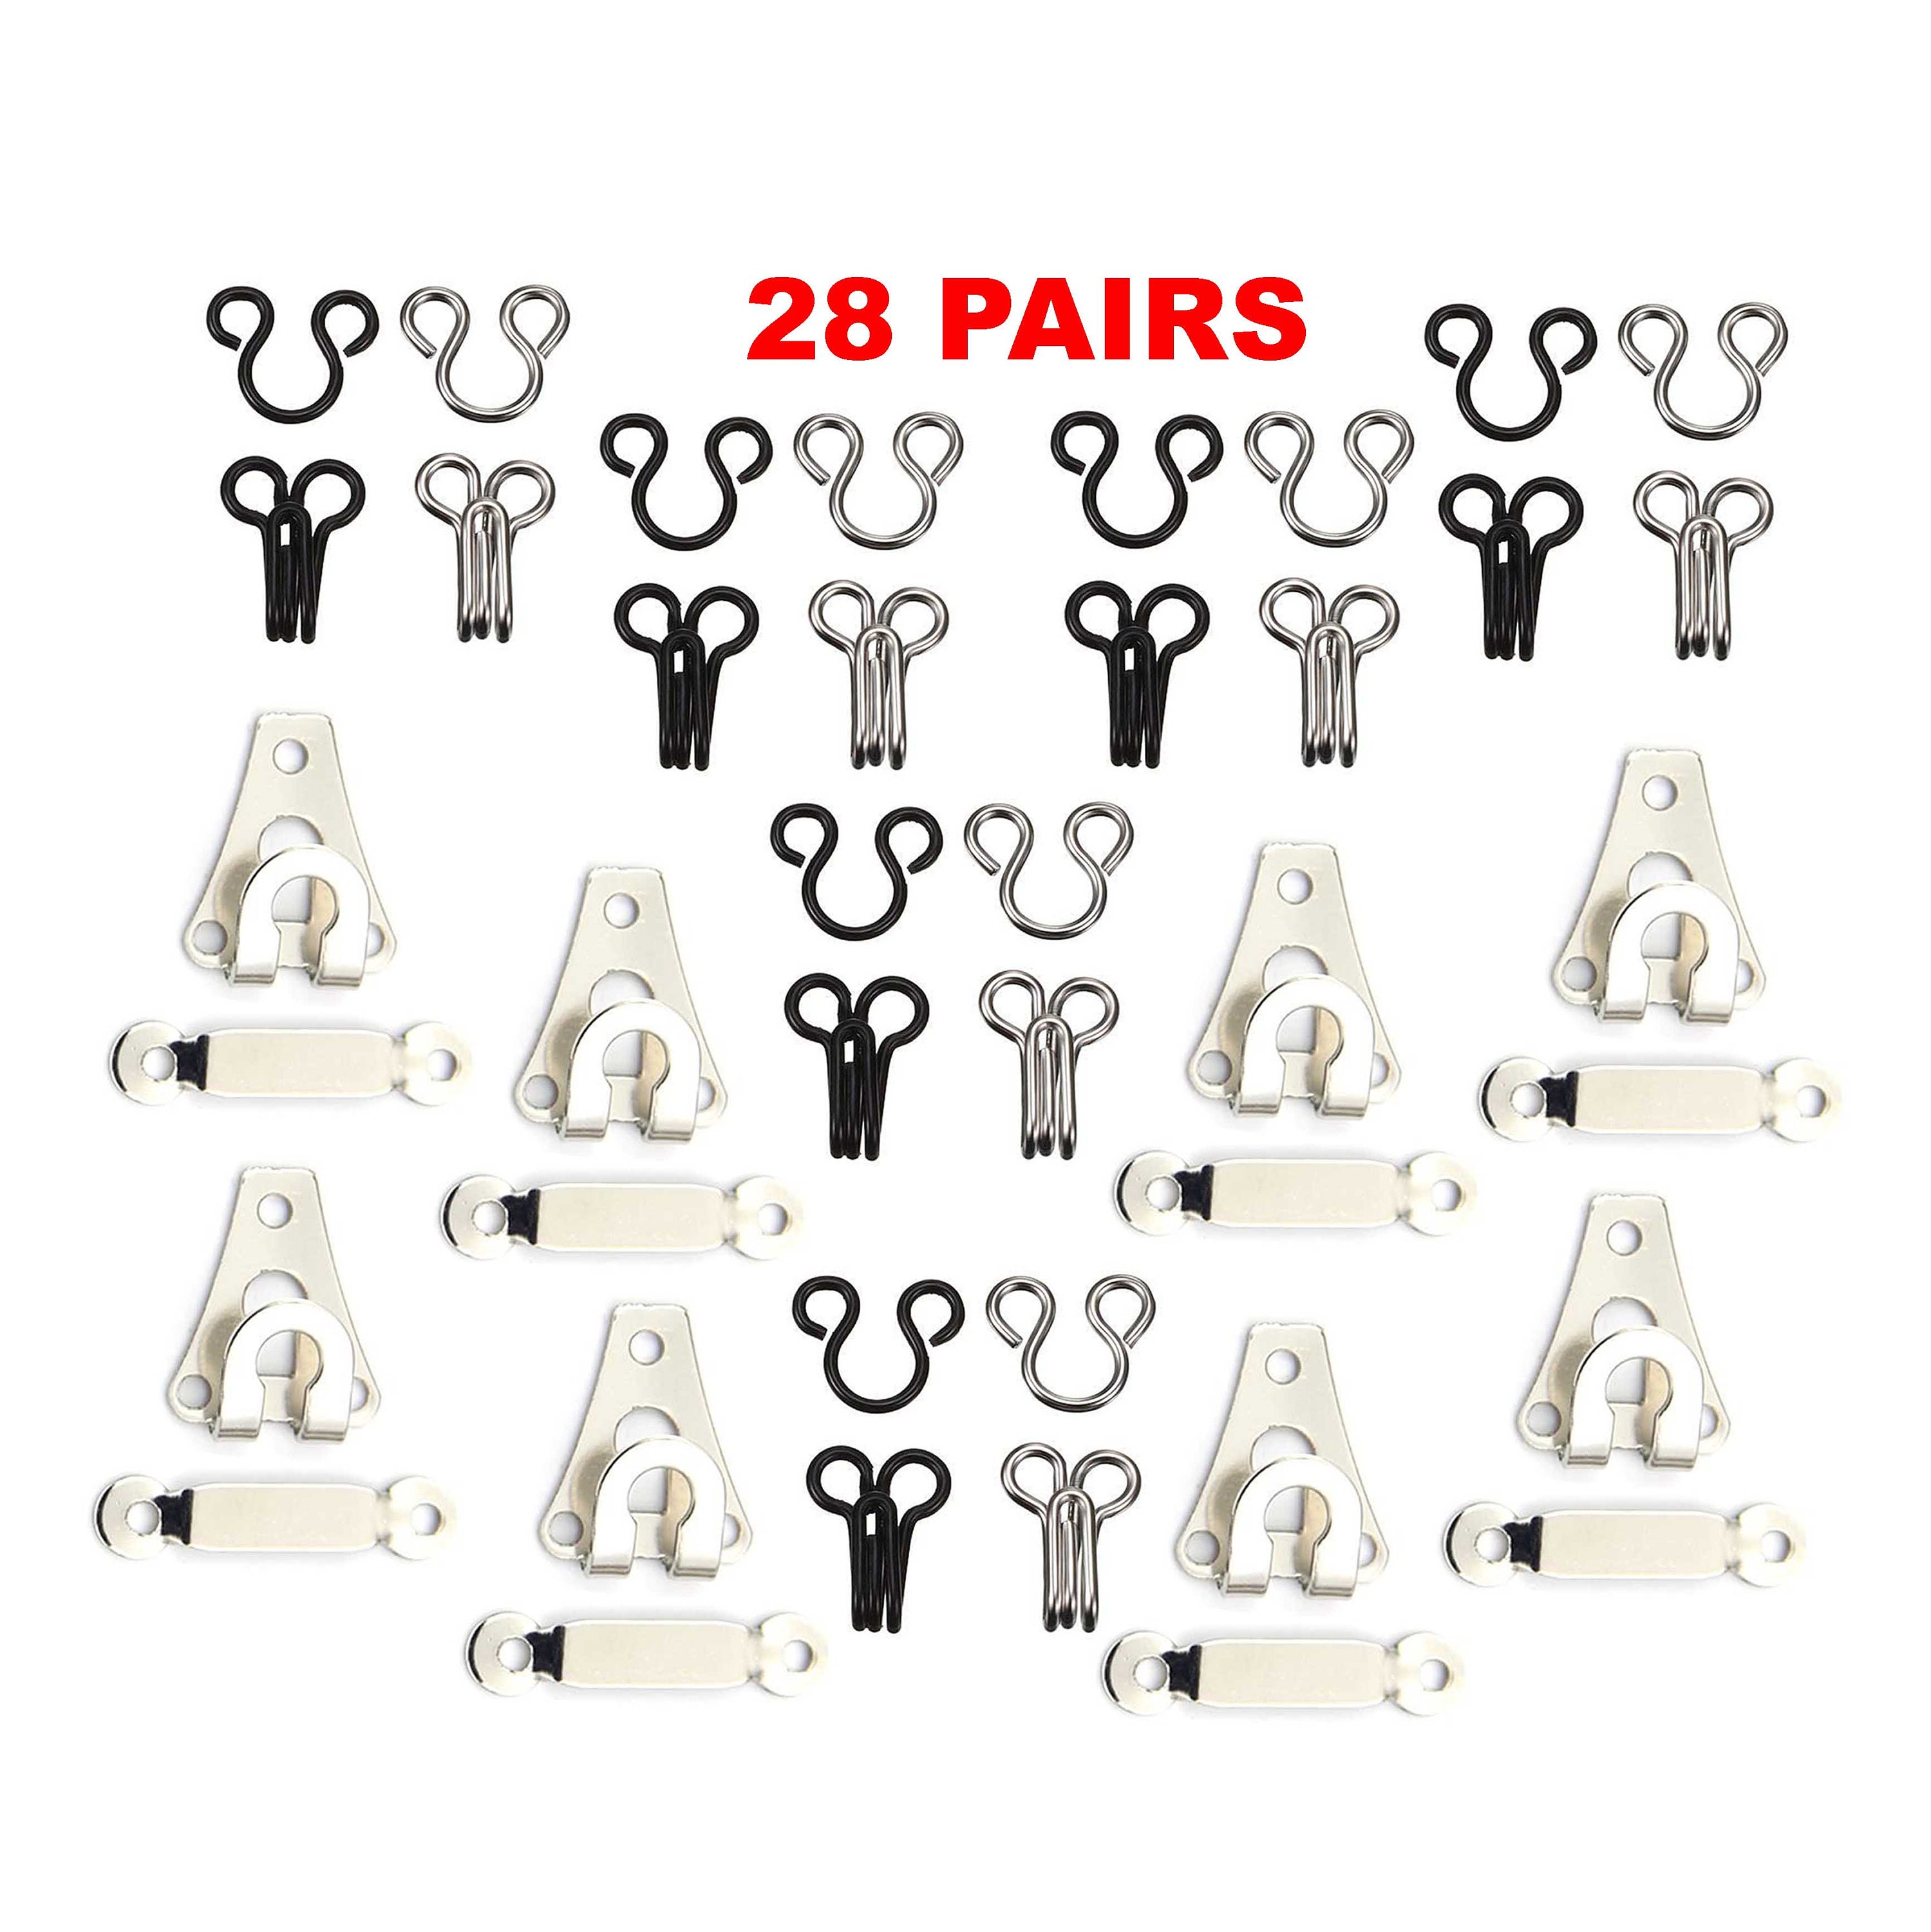 Steel Hook and Eye Metal Hooks and Eyes Closure for Trousers and Skirt Hook and Eye Closures Sew on Hook and Eye Metal Pants Hook and Eye Dark